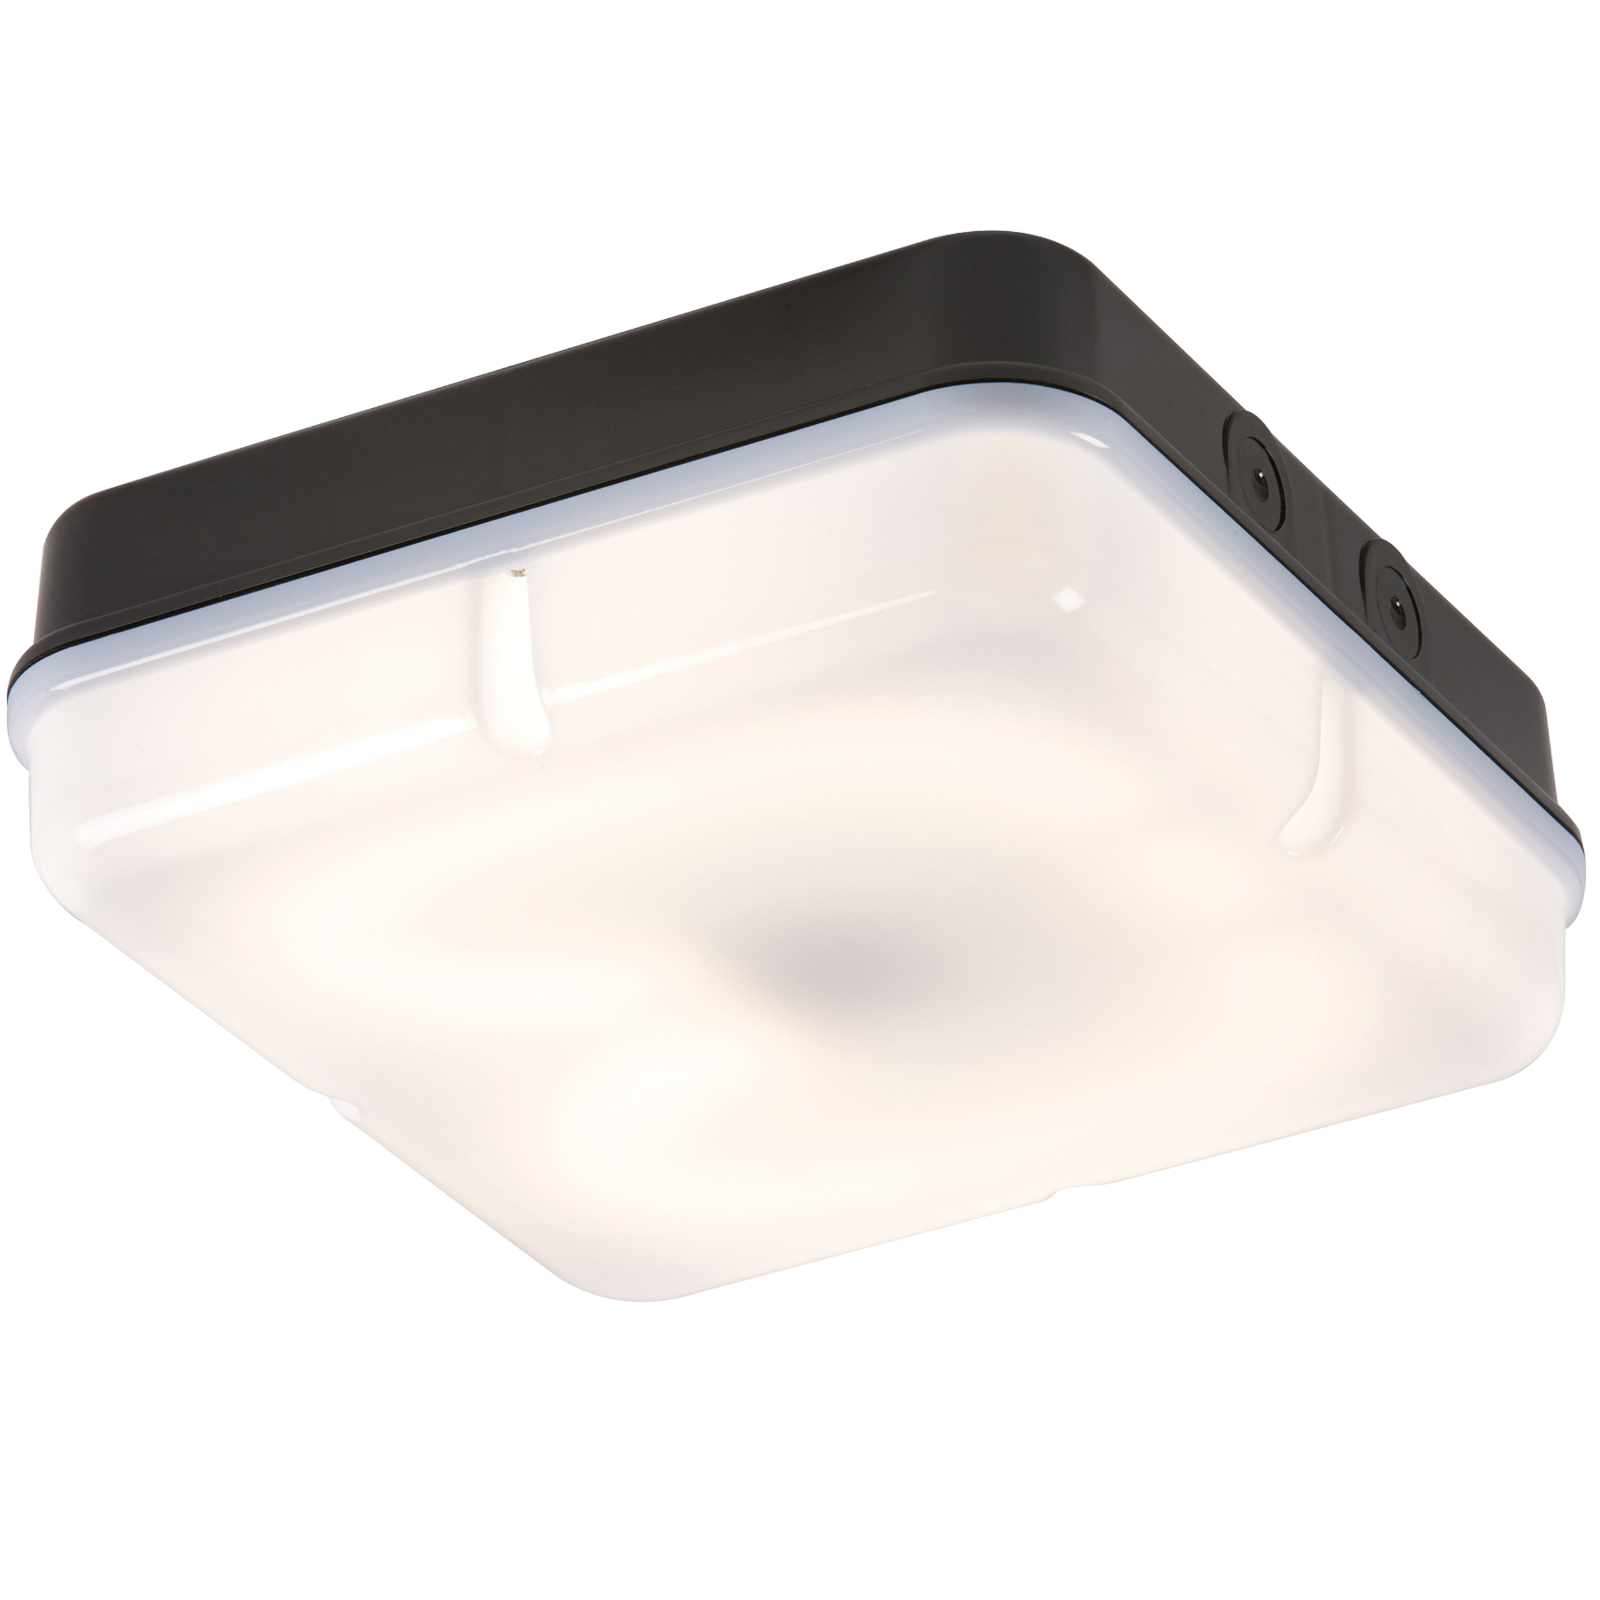 IP65 28W HF Square Emergency Bulkhead With Opal Diffuser And Black Base - TPS28BOEMHF 